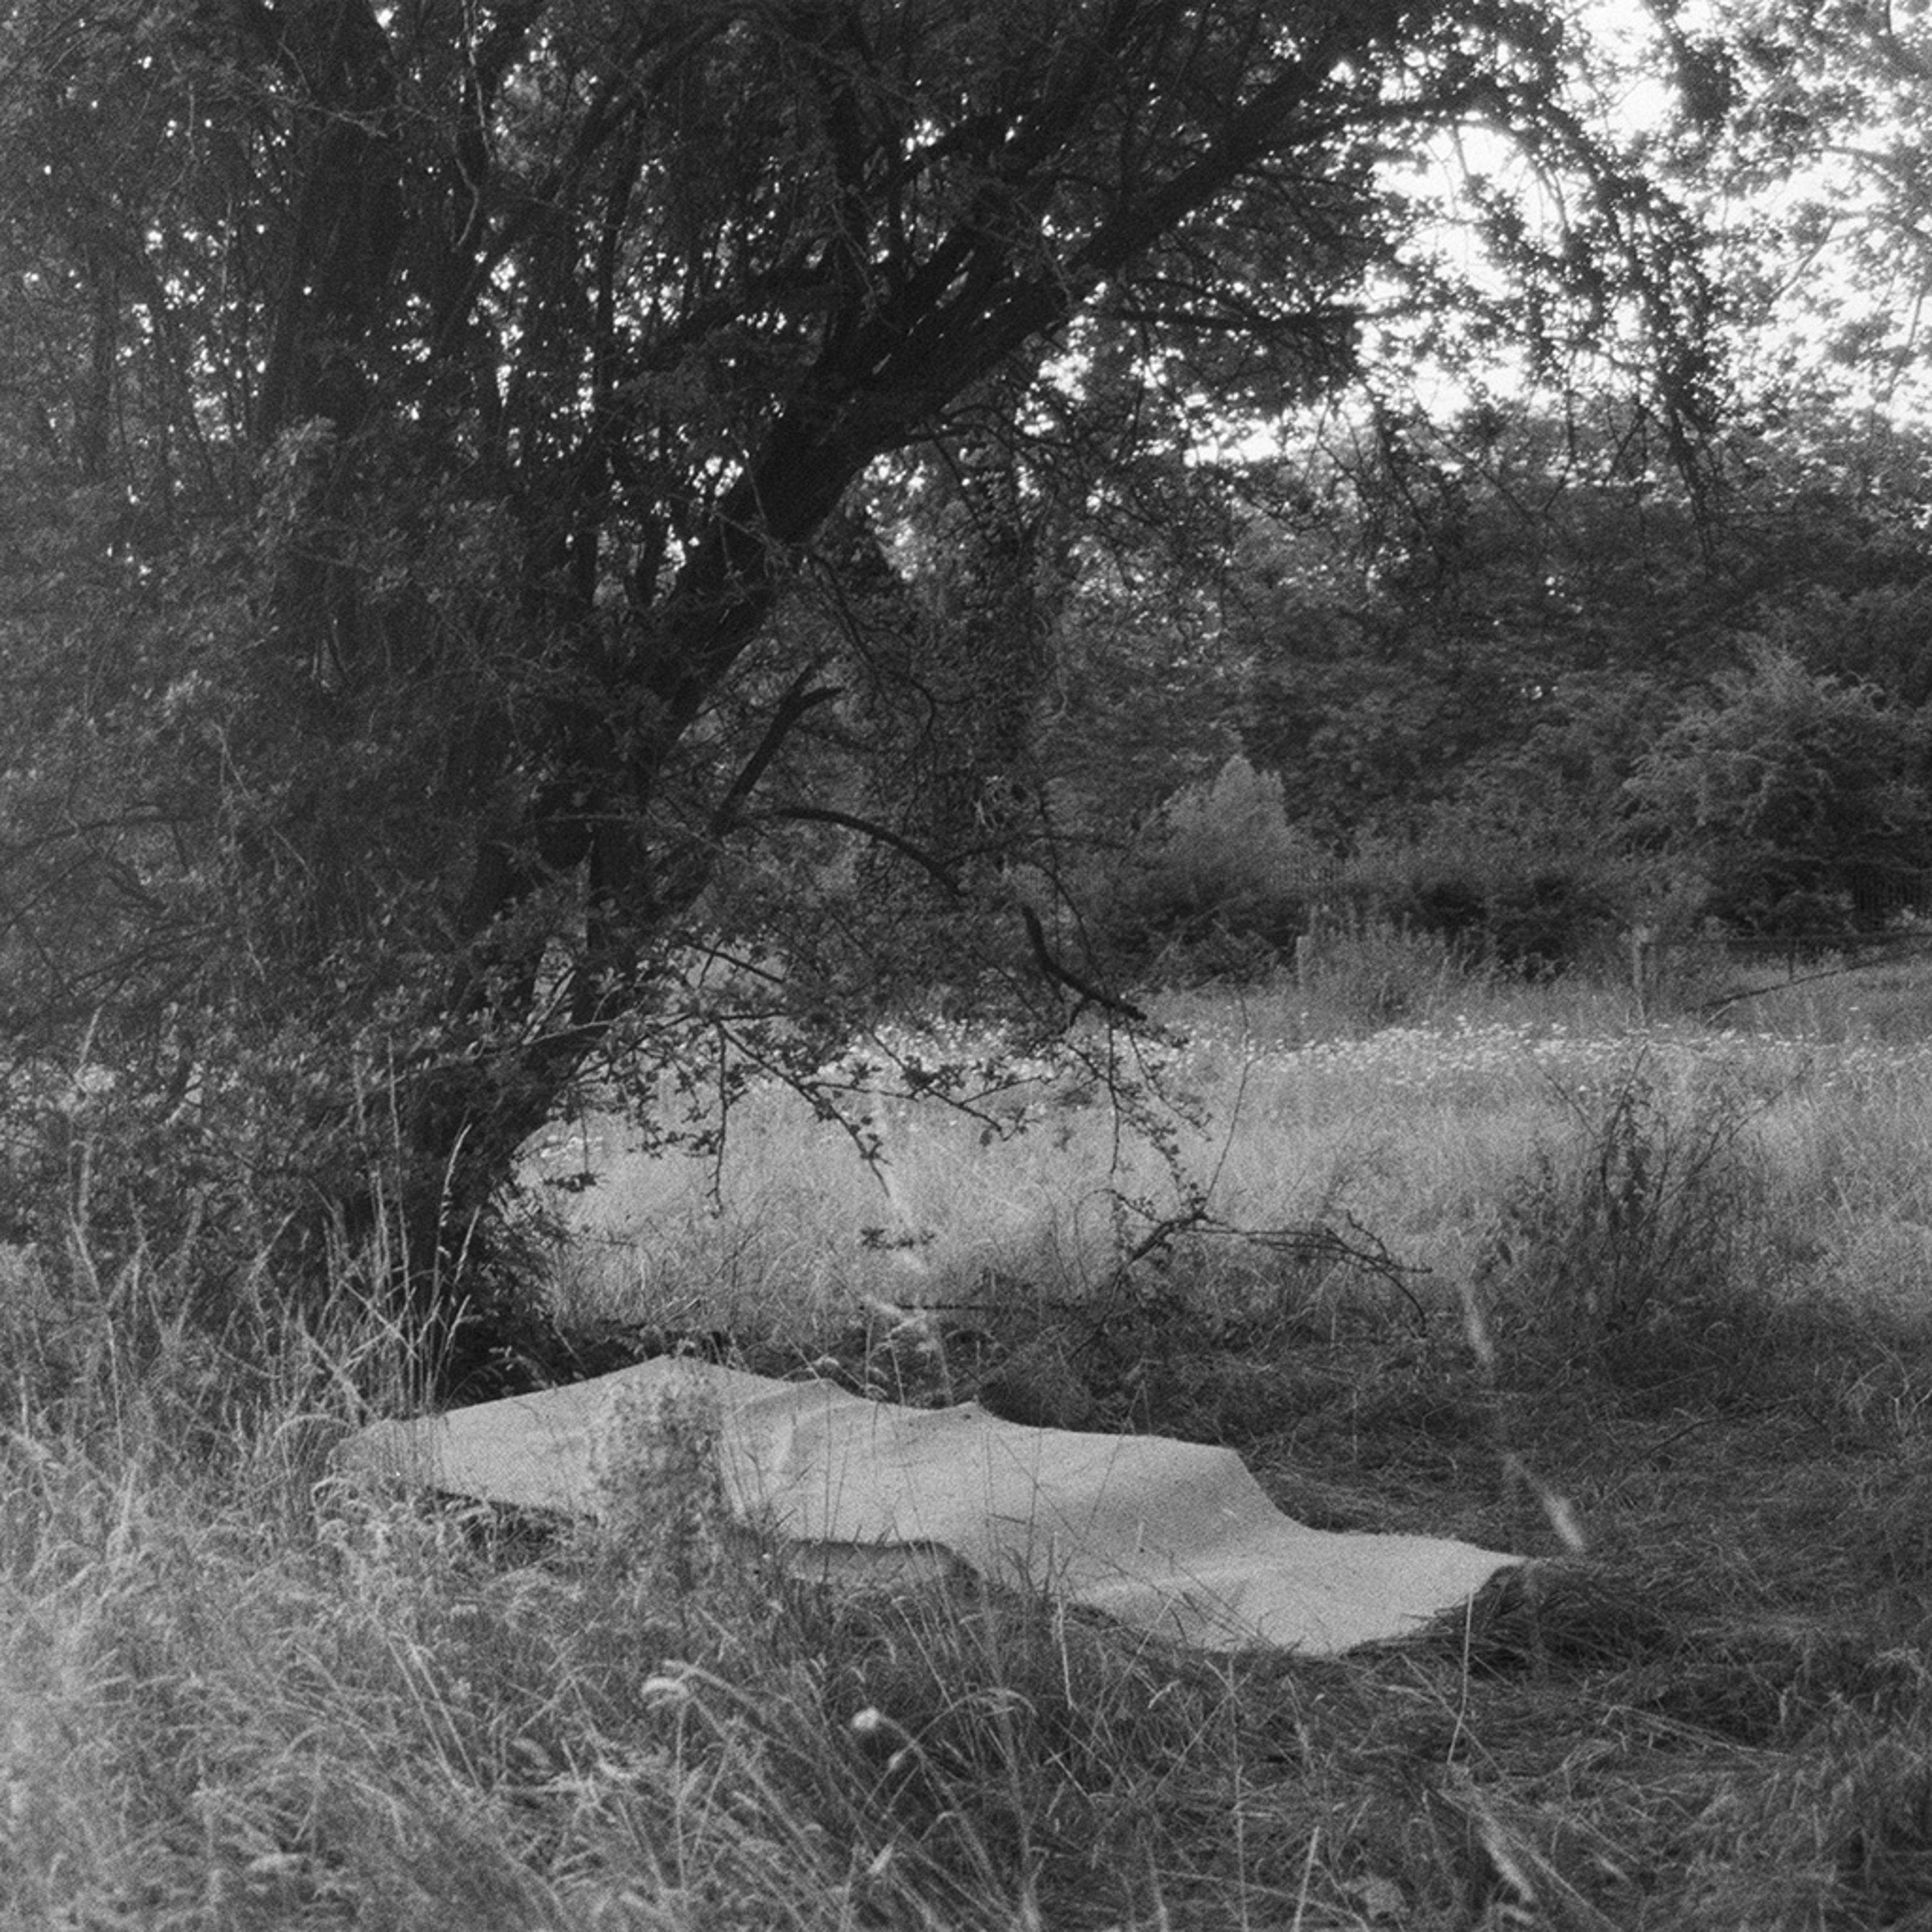 Square mattress underneath a tree, covered with a cloth